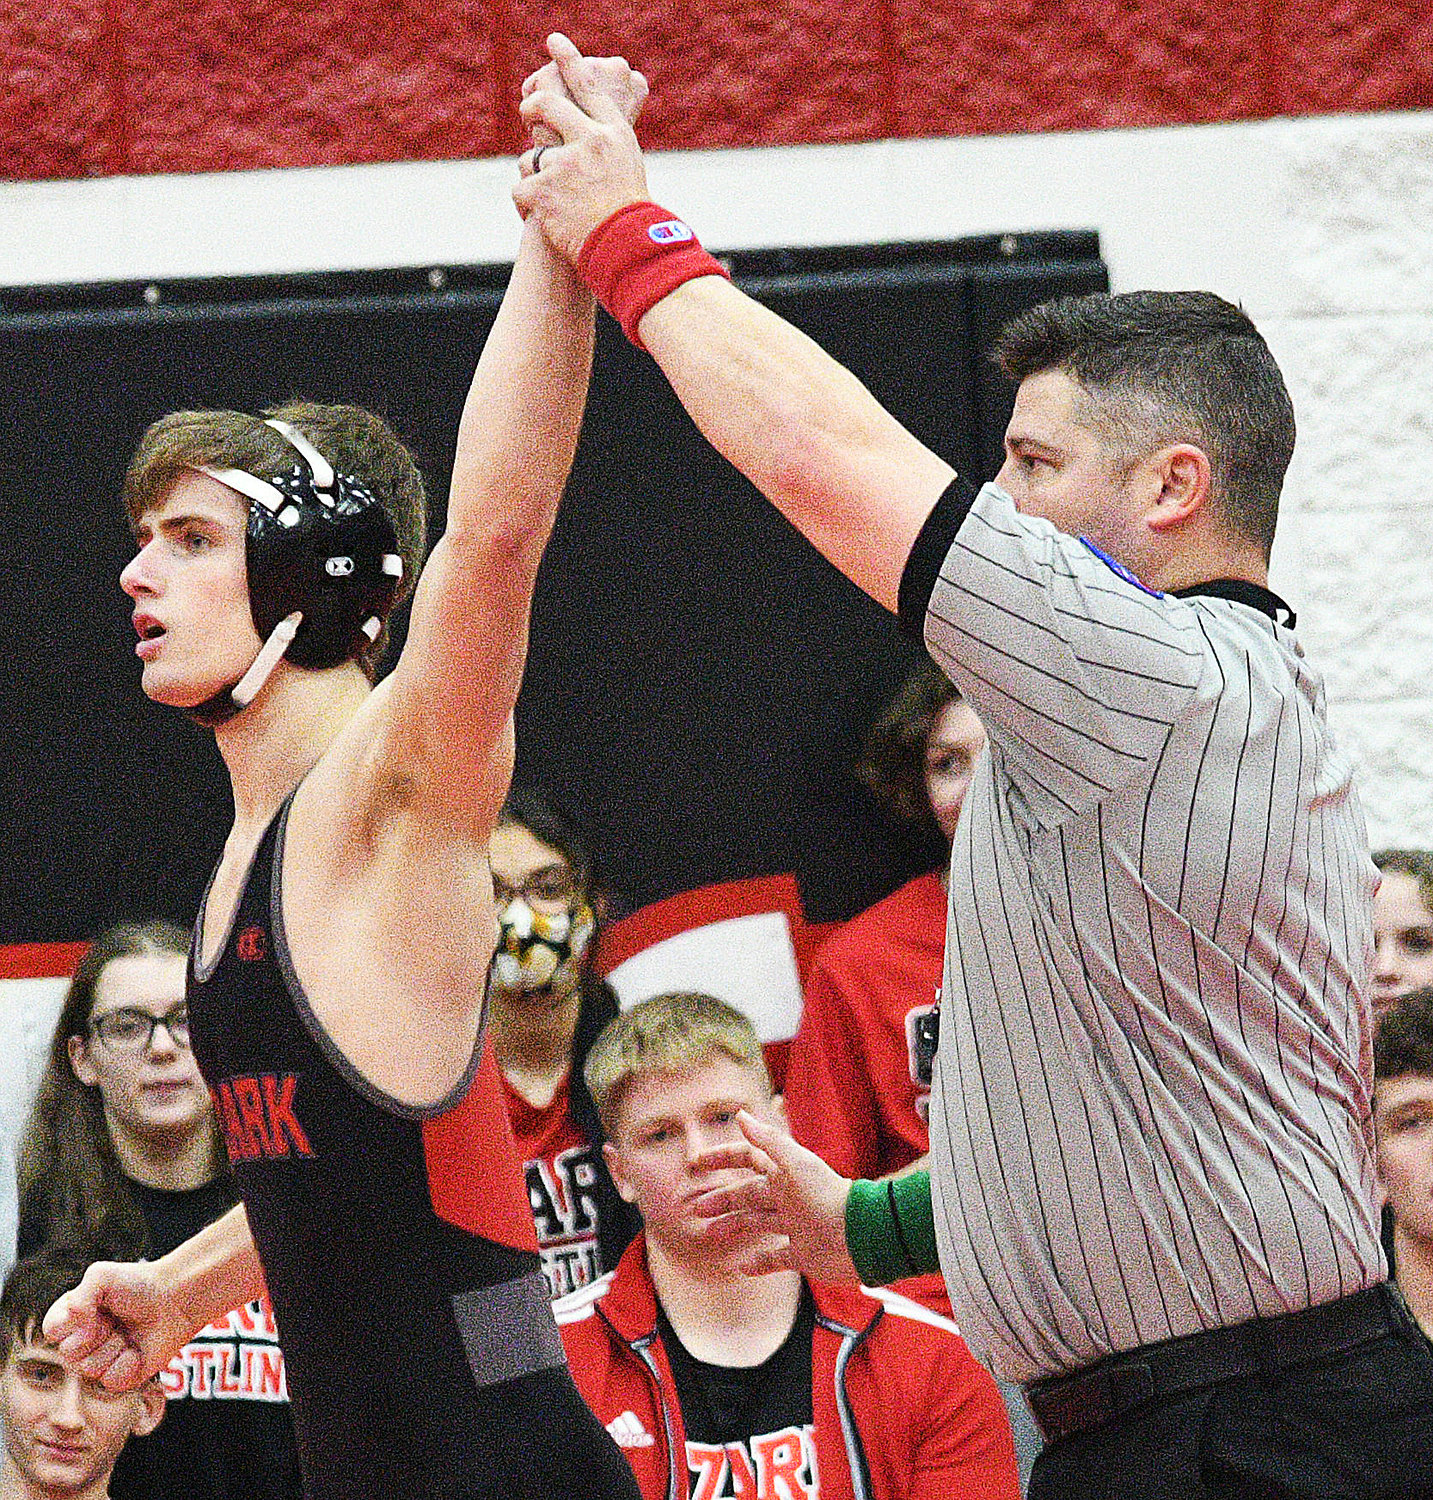 LEVI MASKROD has his arm raised in victory at 132.